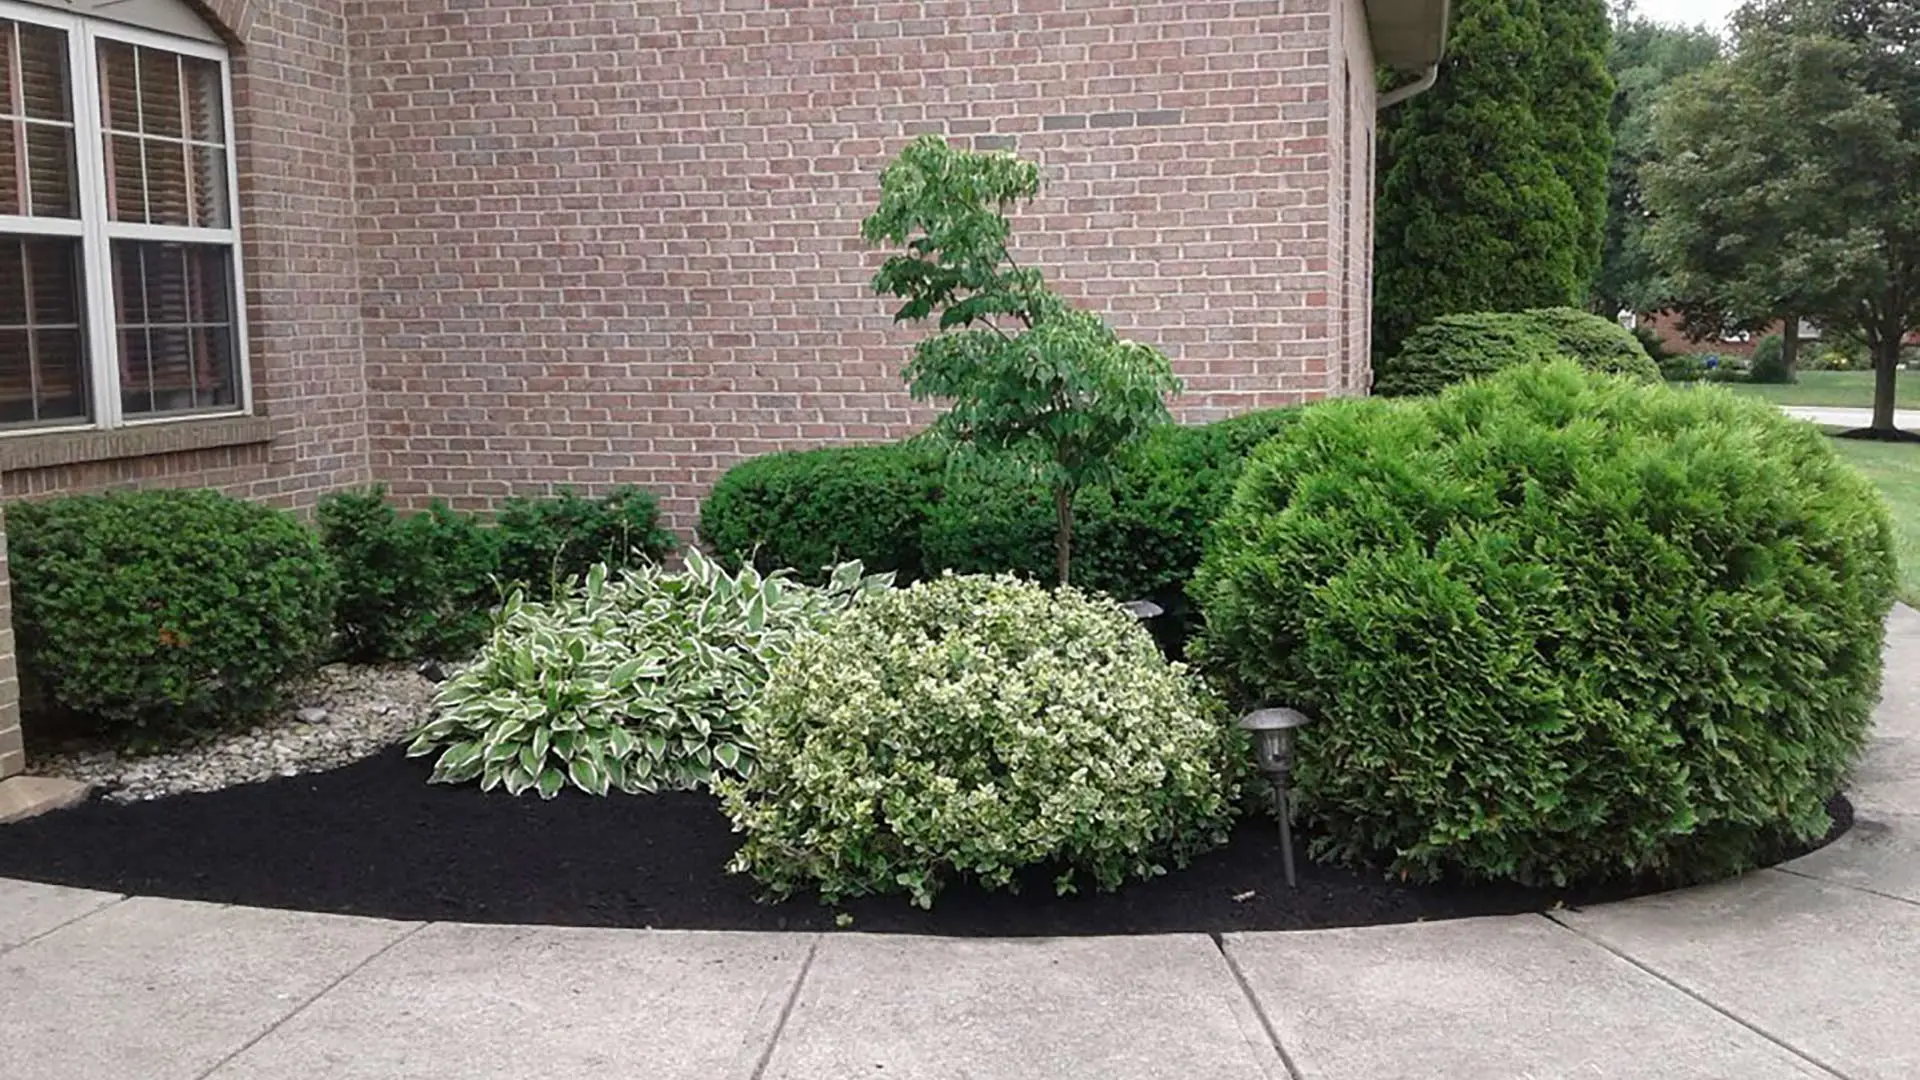 Trimmed shrubs and plantings in a landscape bed for a home in Mason, OH.